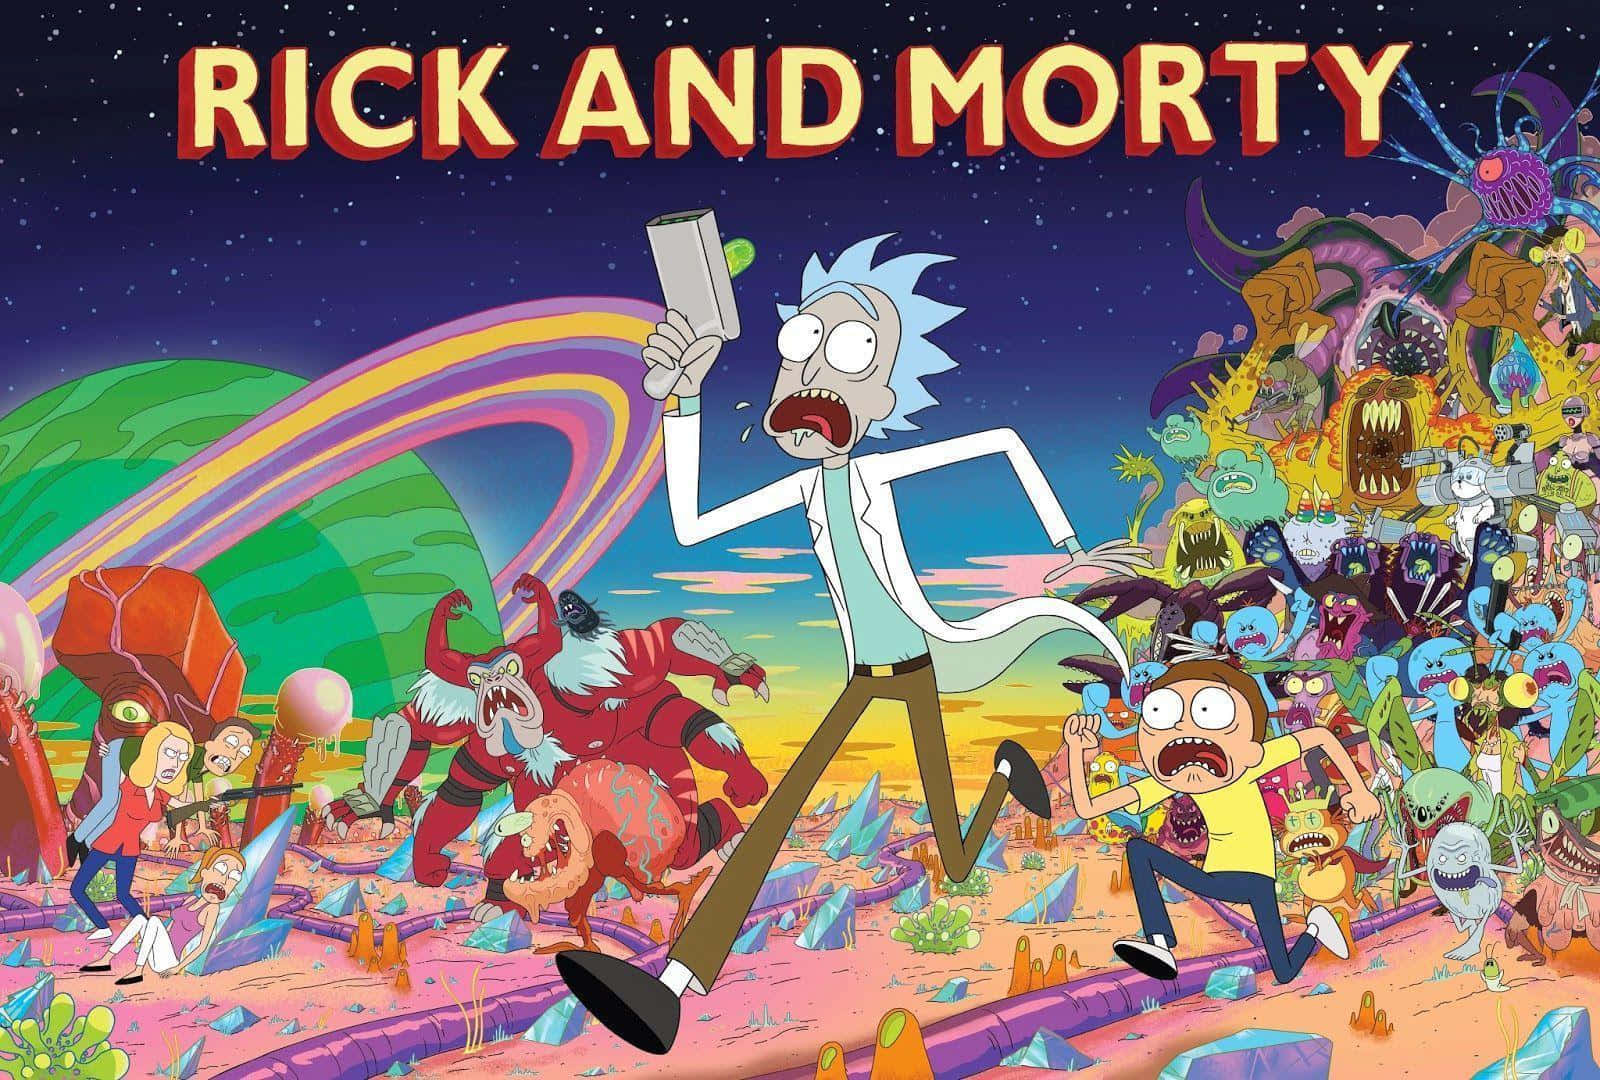 Get ready to go on a wild adventure with Rick and Morty! Wallpaper